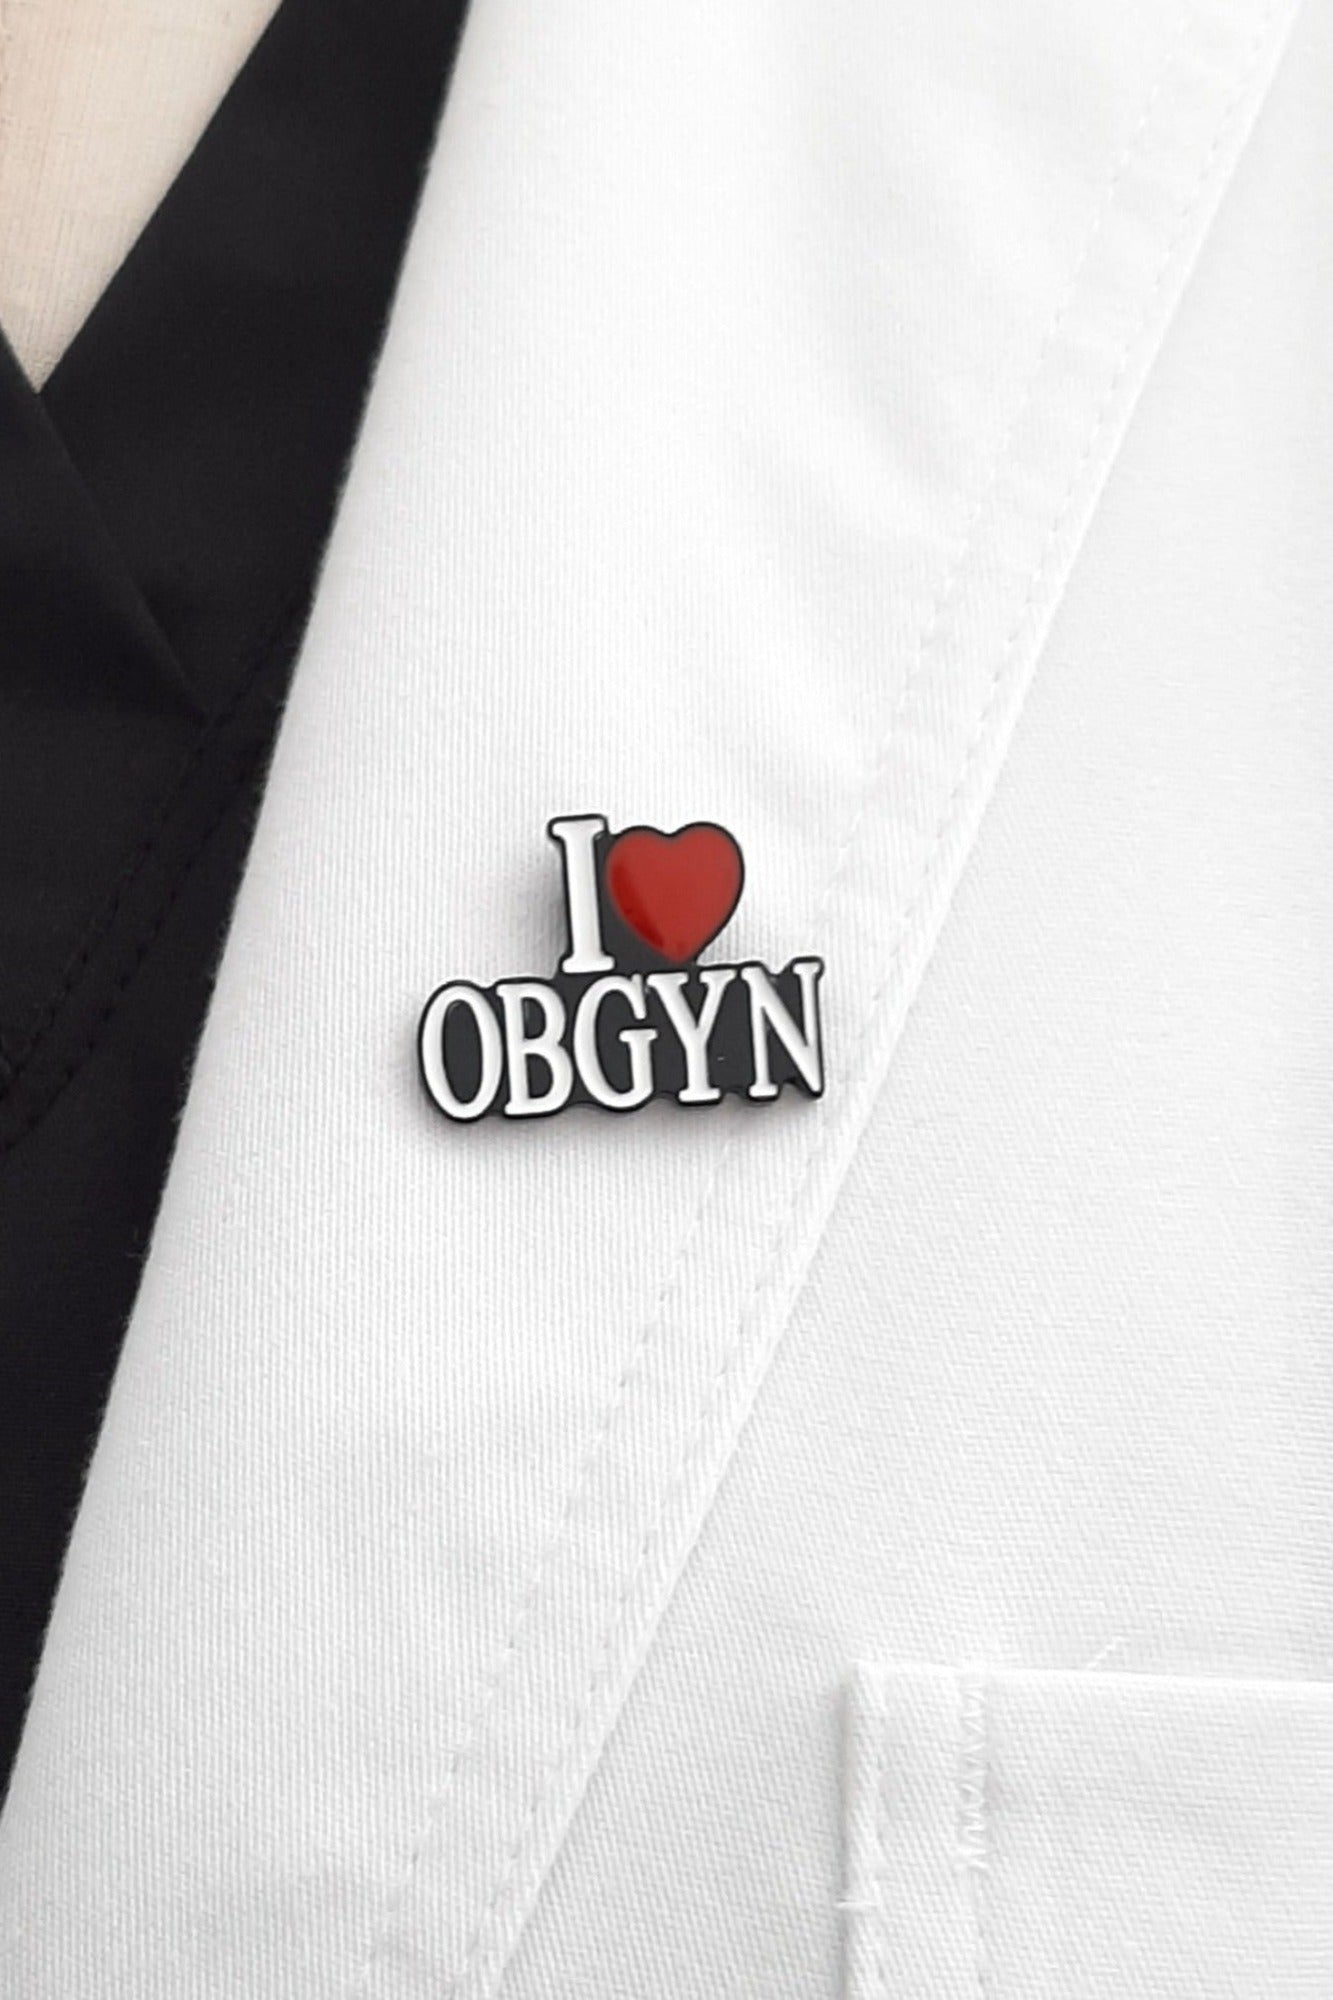 products-obygn-jpg